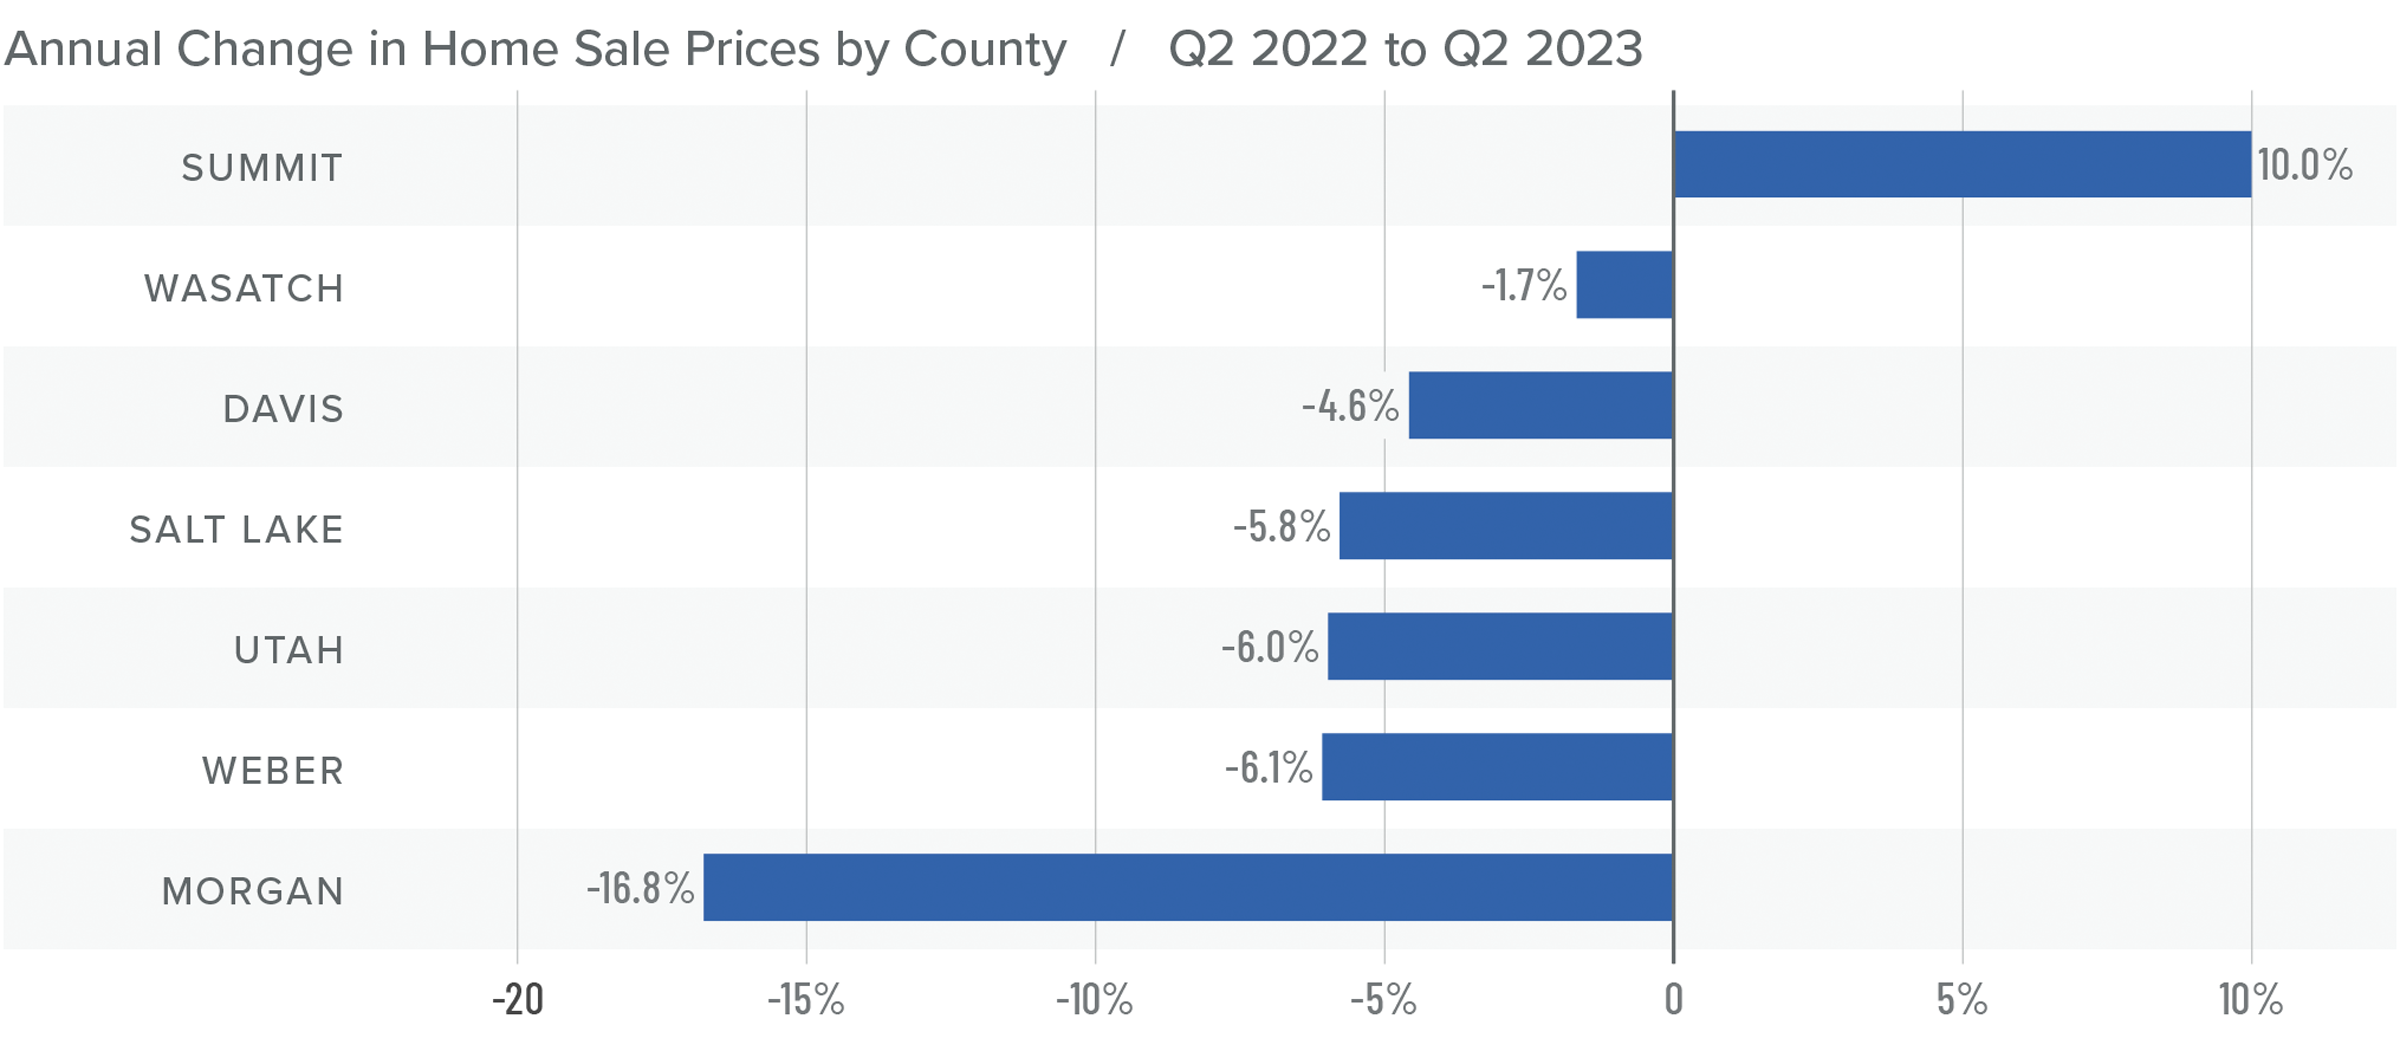 A bar graph showing the annual change in home sale prices by county in Utah from Q2 2022 to Q2 2023. Summit County tops the list at 10%, while Morgan County had the greatest decline at -16.8%. Salt Lake and Utah Counties were toward the middle at around -6%.